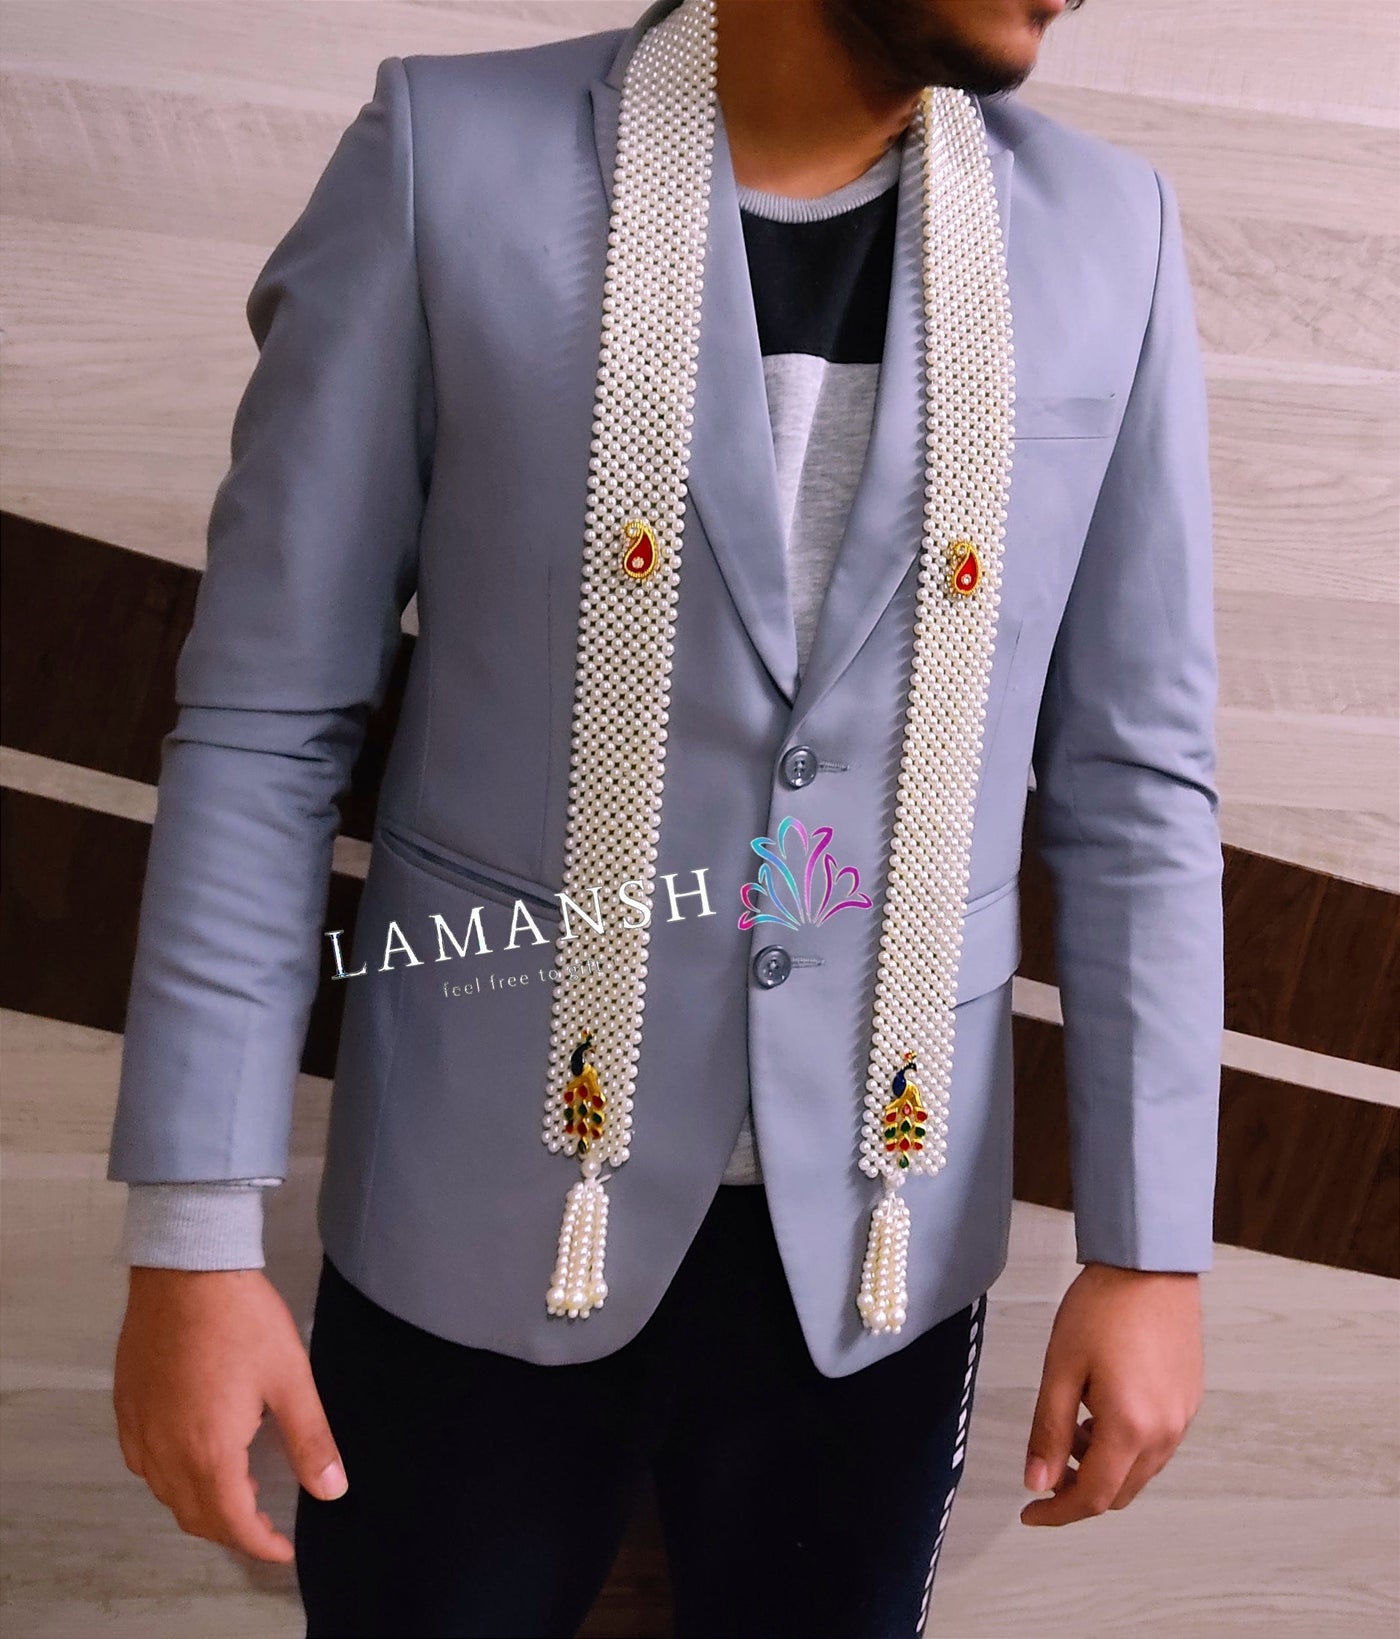 Lamansh Barati Swagat mala LAMANSH® Royal 👑 Guests Welcome Barati Swagat Mala / Dupatta / Stole / Patka's For Weddings | Special Welcome Accessories for Male Gents Guests Barati's